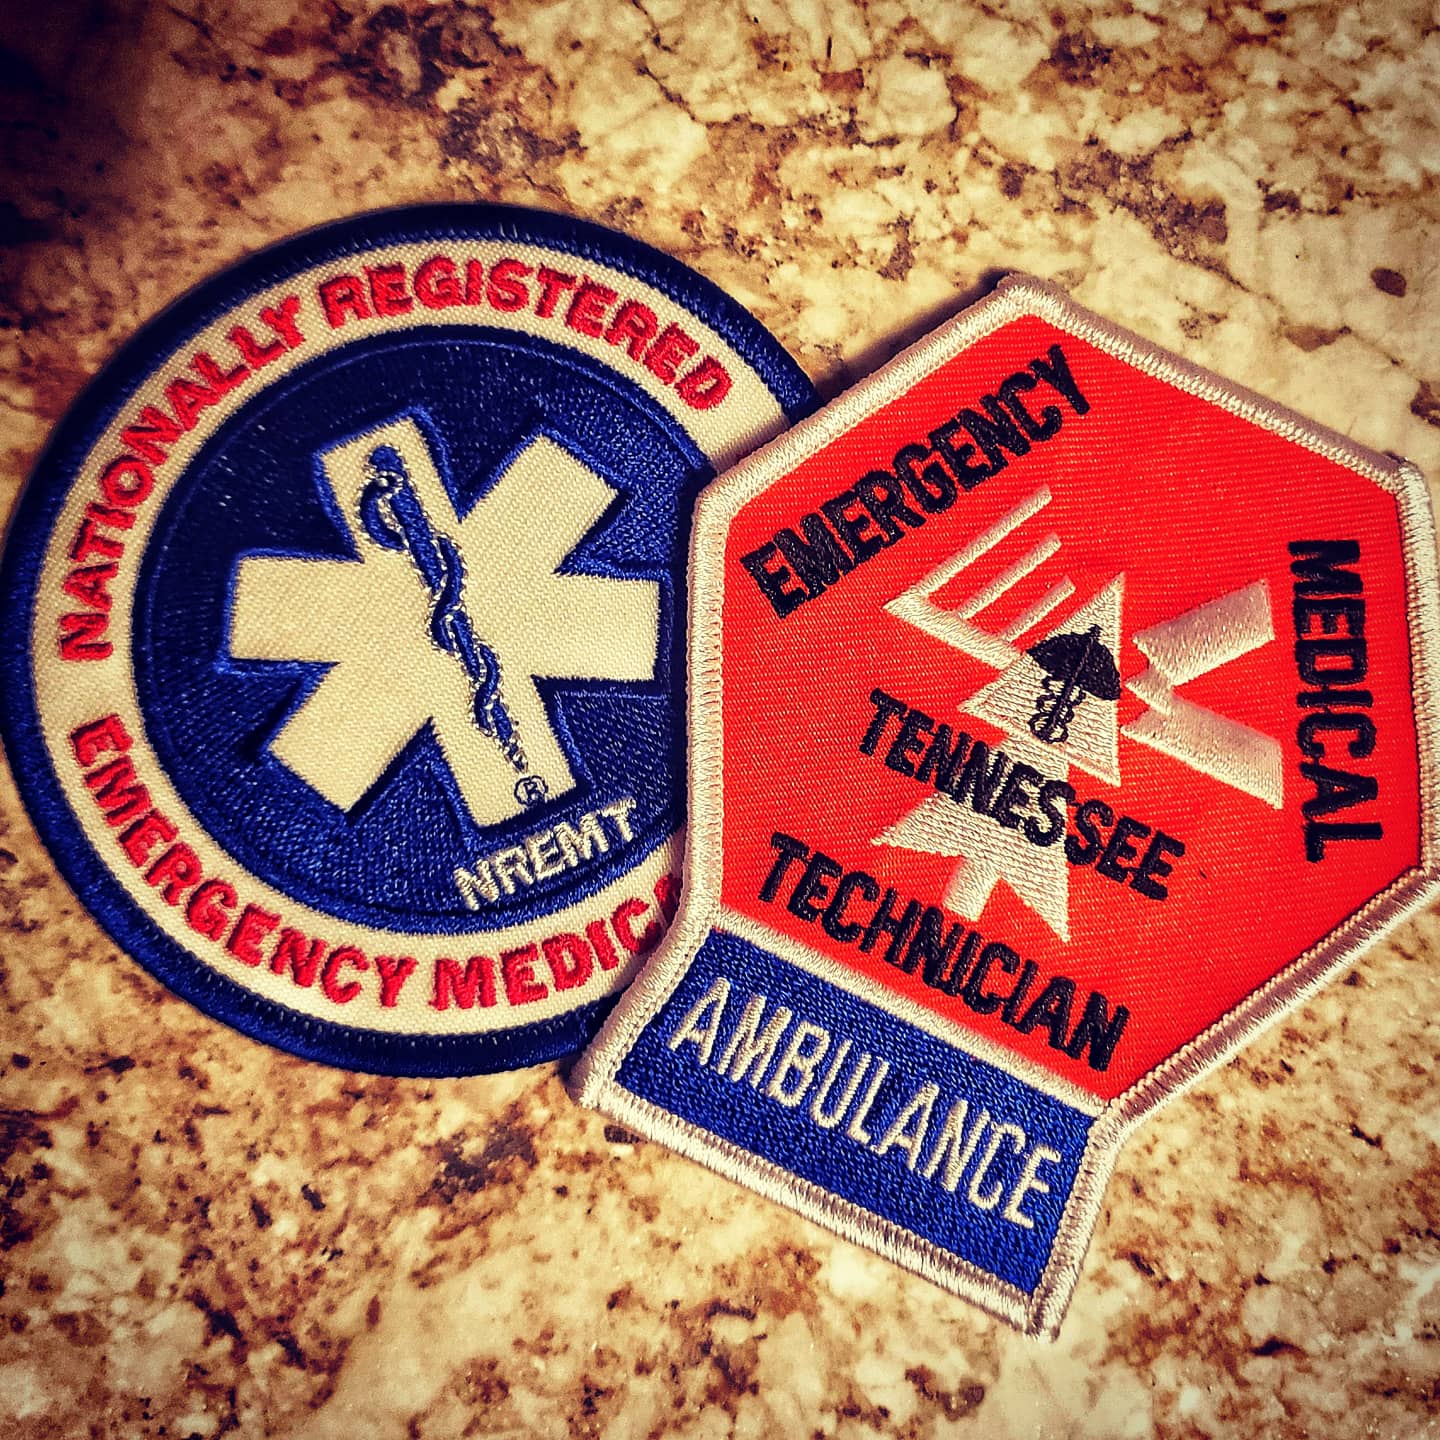 Tennessee EMT patch (what's on it)?